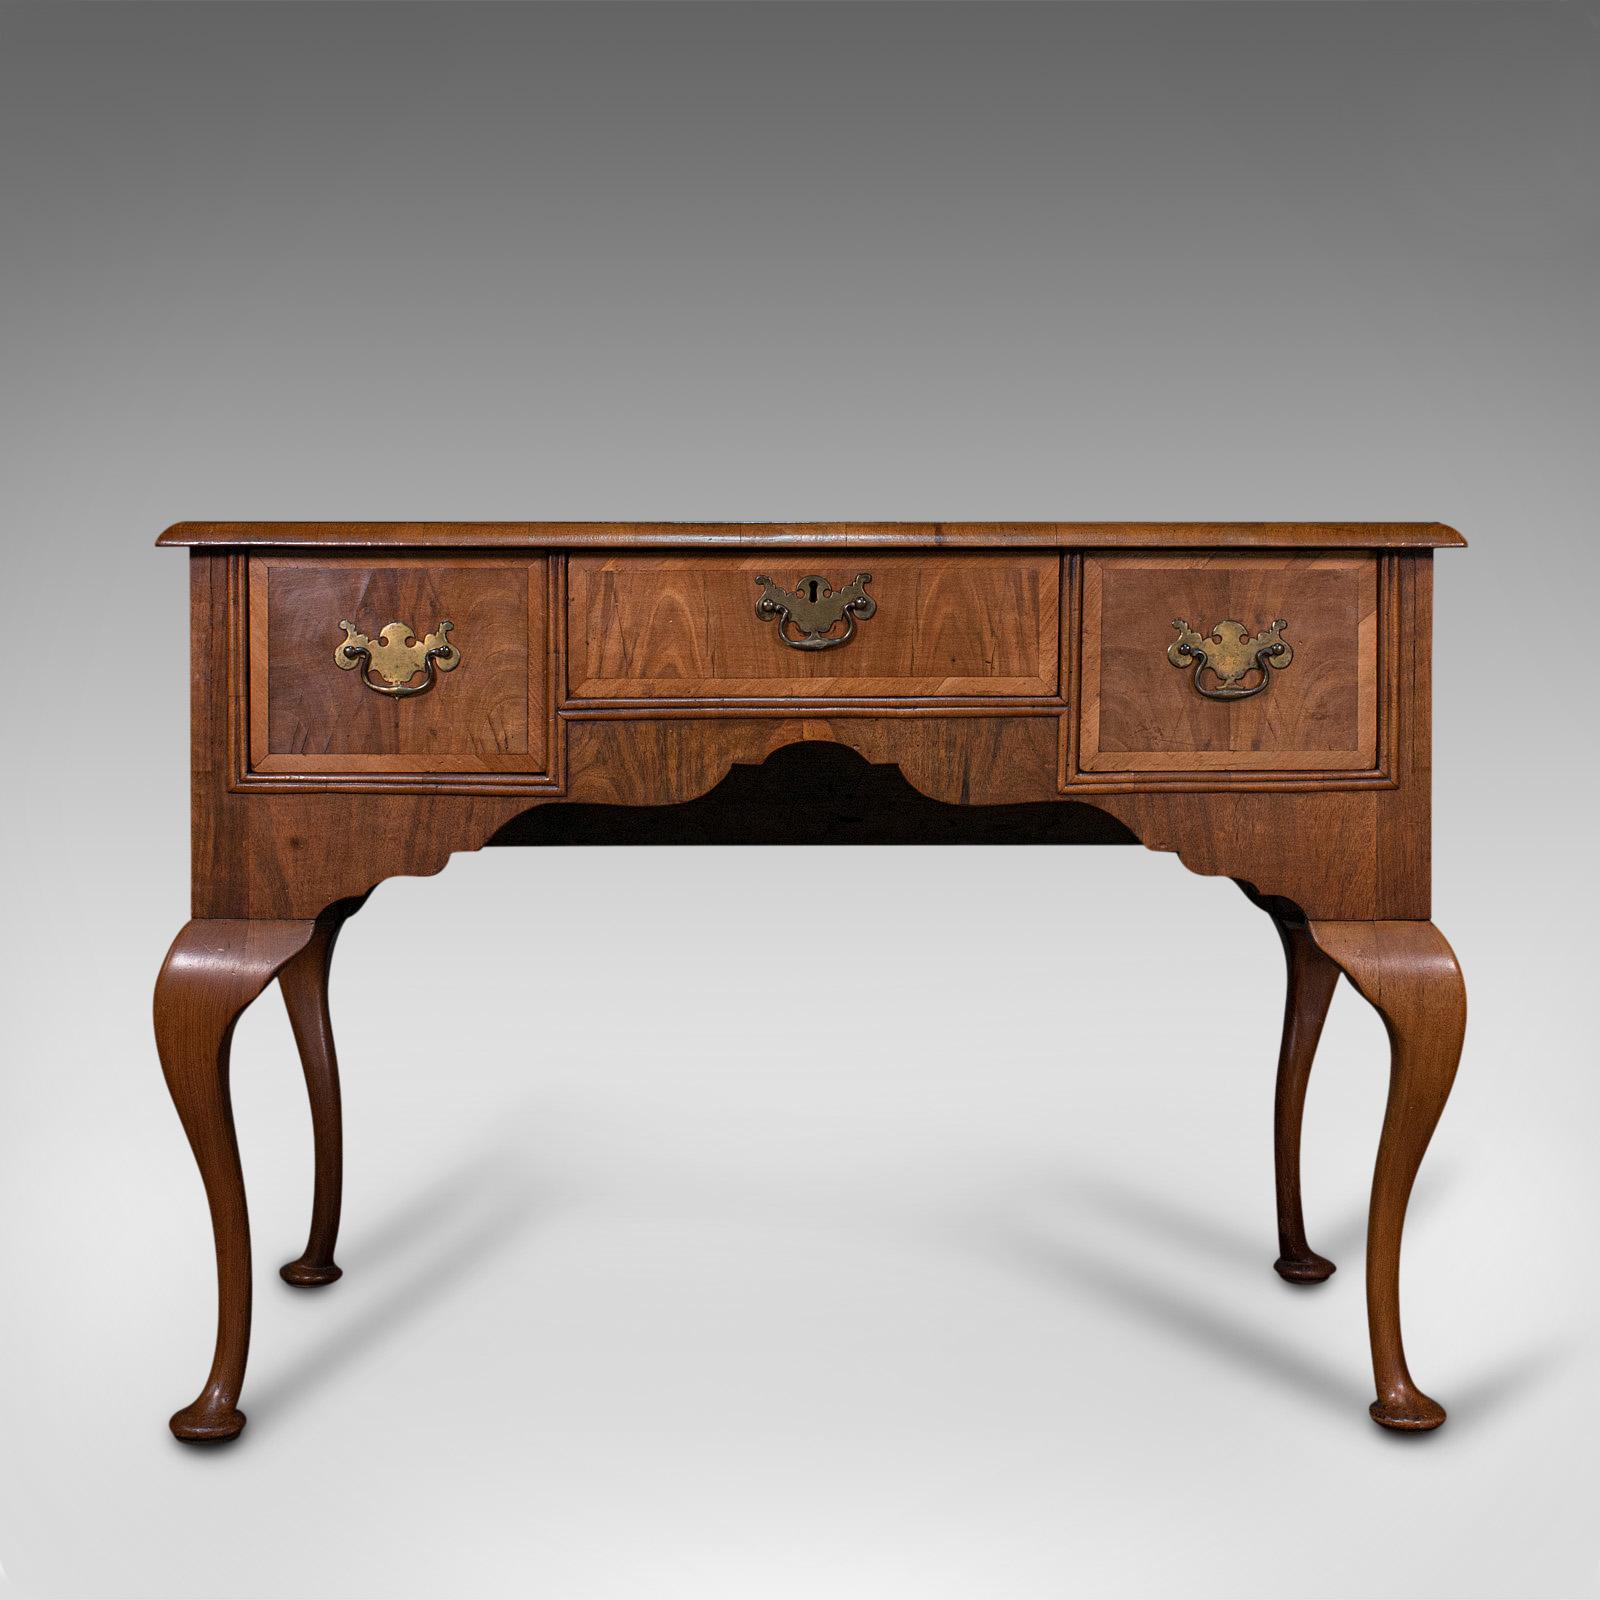 This is an antique writing desk. An English, burr walnut and oak lowboy or table, dating to the Georgian period, circa 1800.

Captivatingly figured and of superb elegance
Displays a desirable aged patina and in fine antique order
Burr walnut